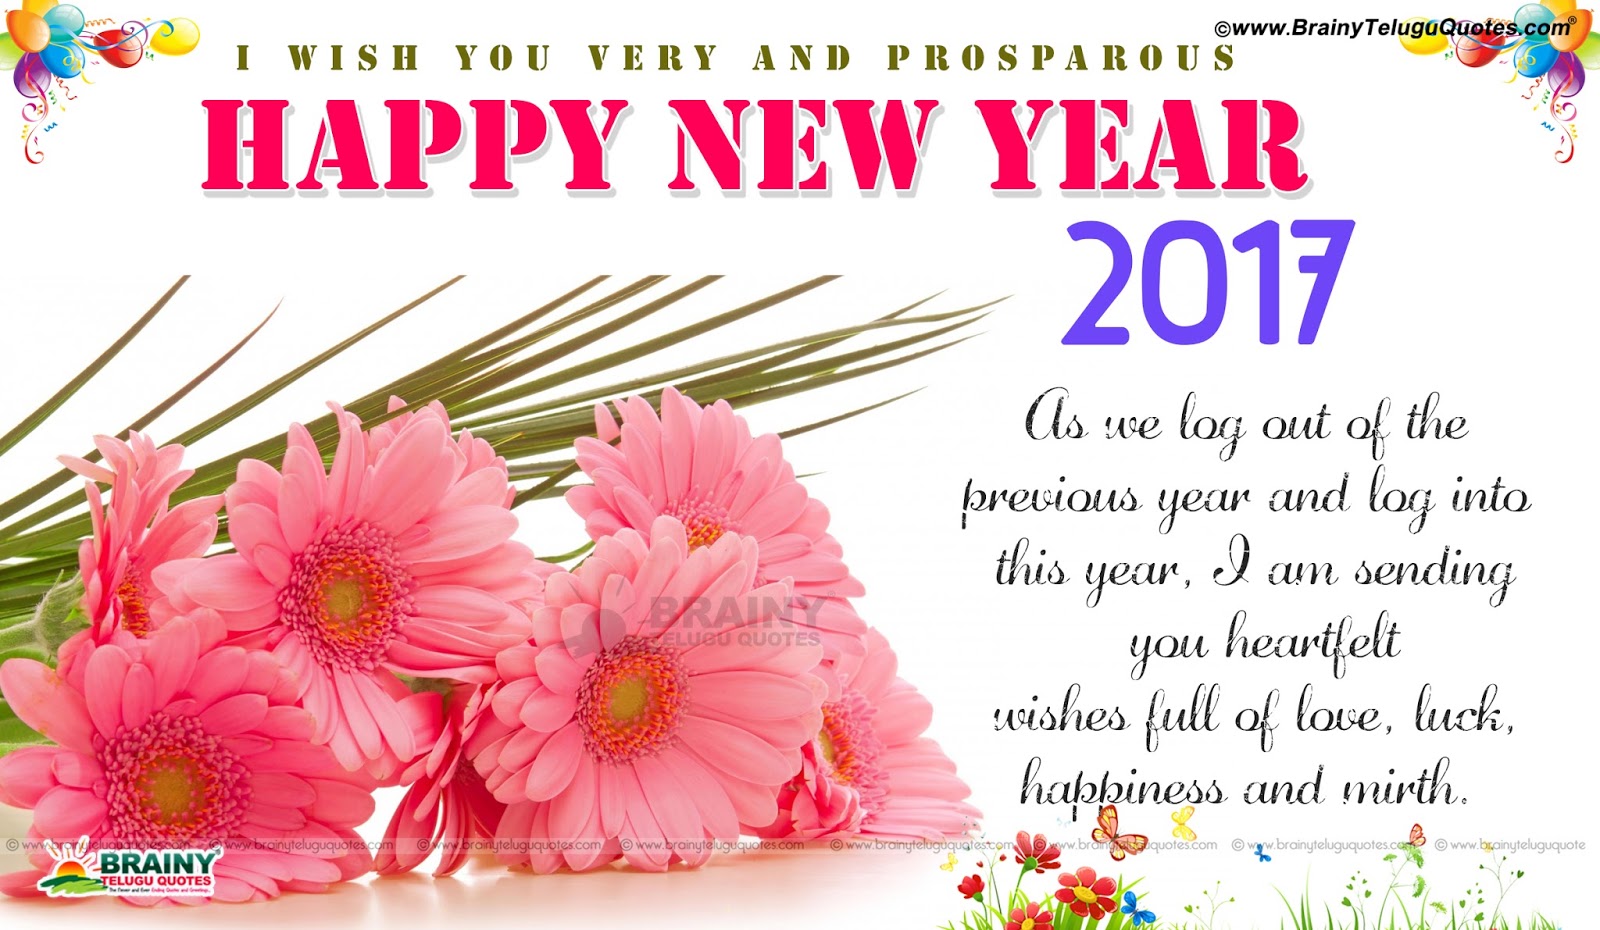  Top  Best  Latest 5 English  Inspirational Happy  New  Year  